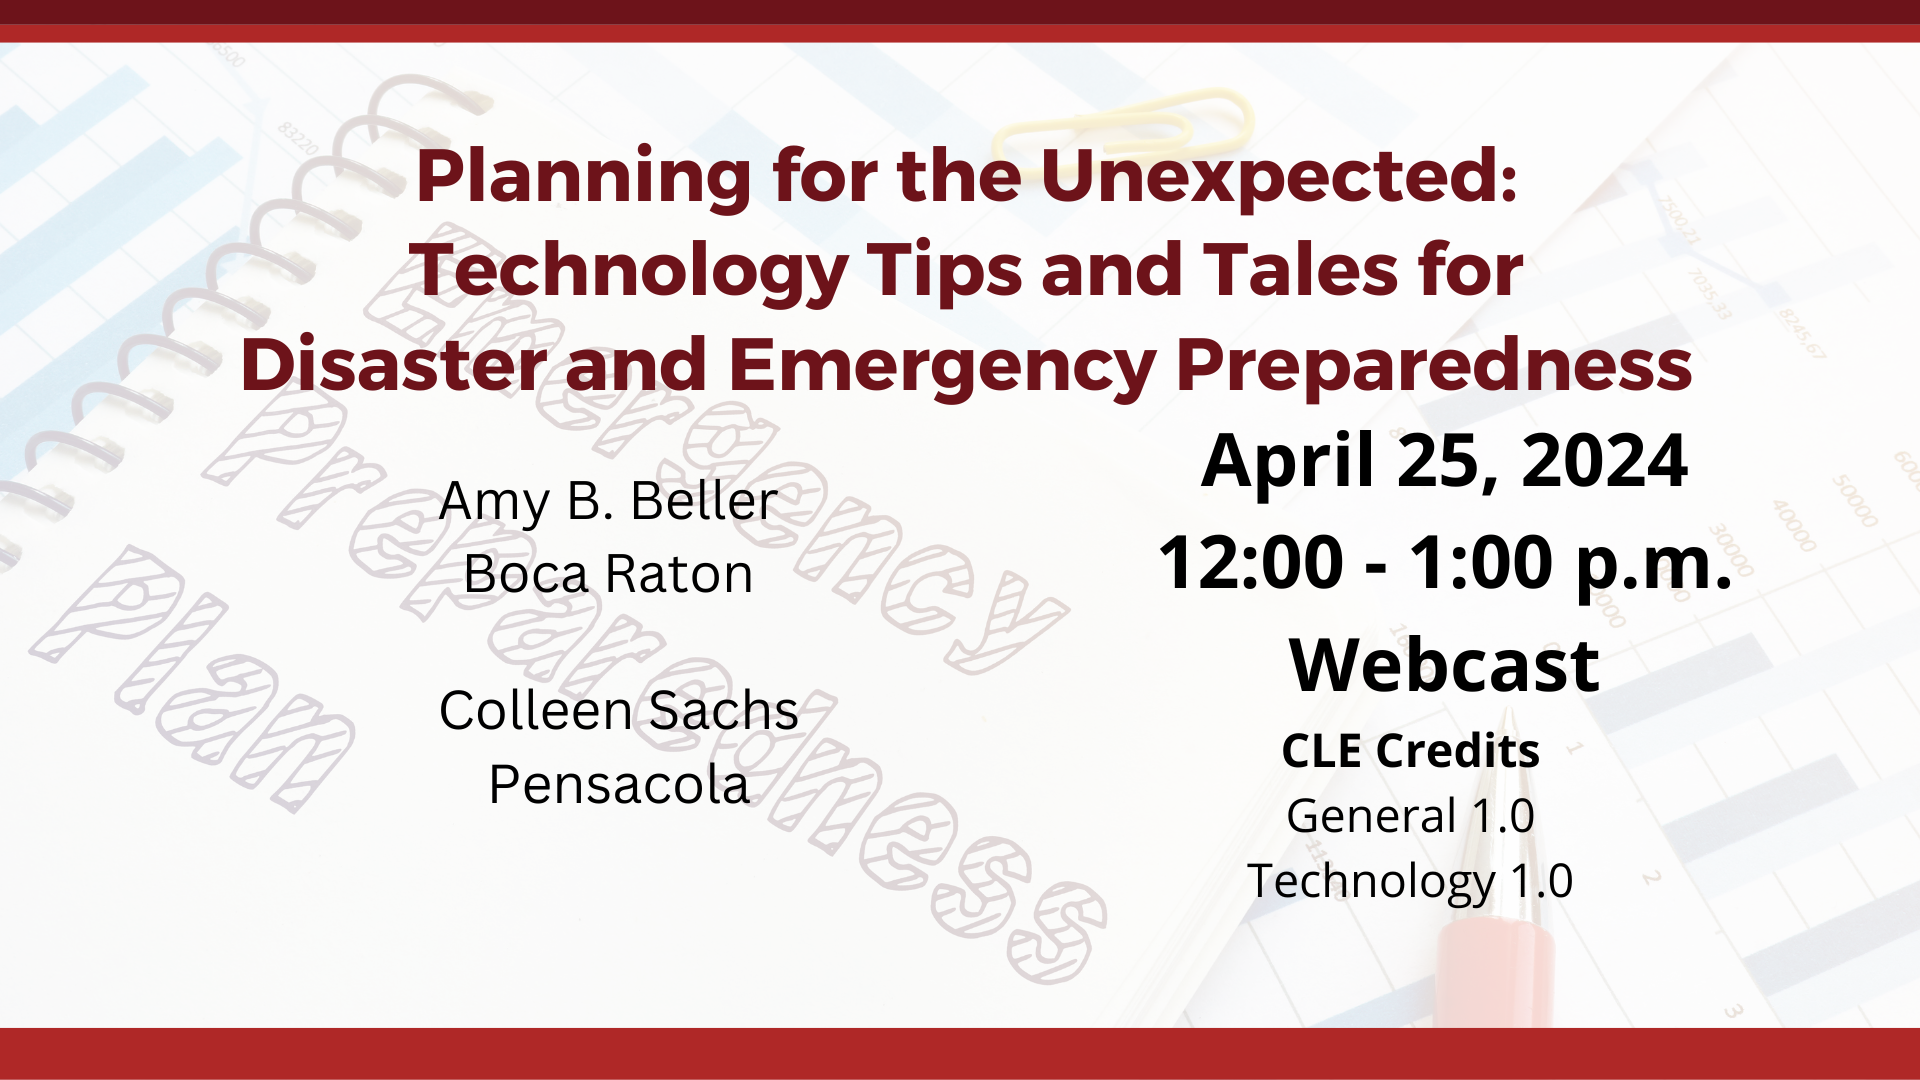 Planning for the Unexpected: Technology Tips and Tales for Disaster and Emergency Preparedness